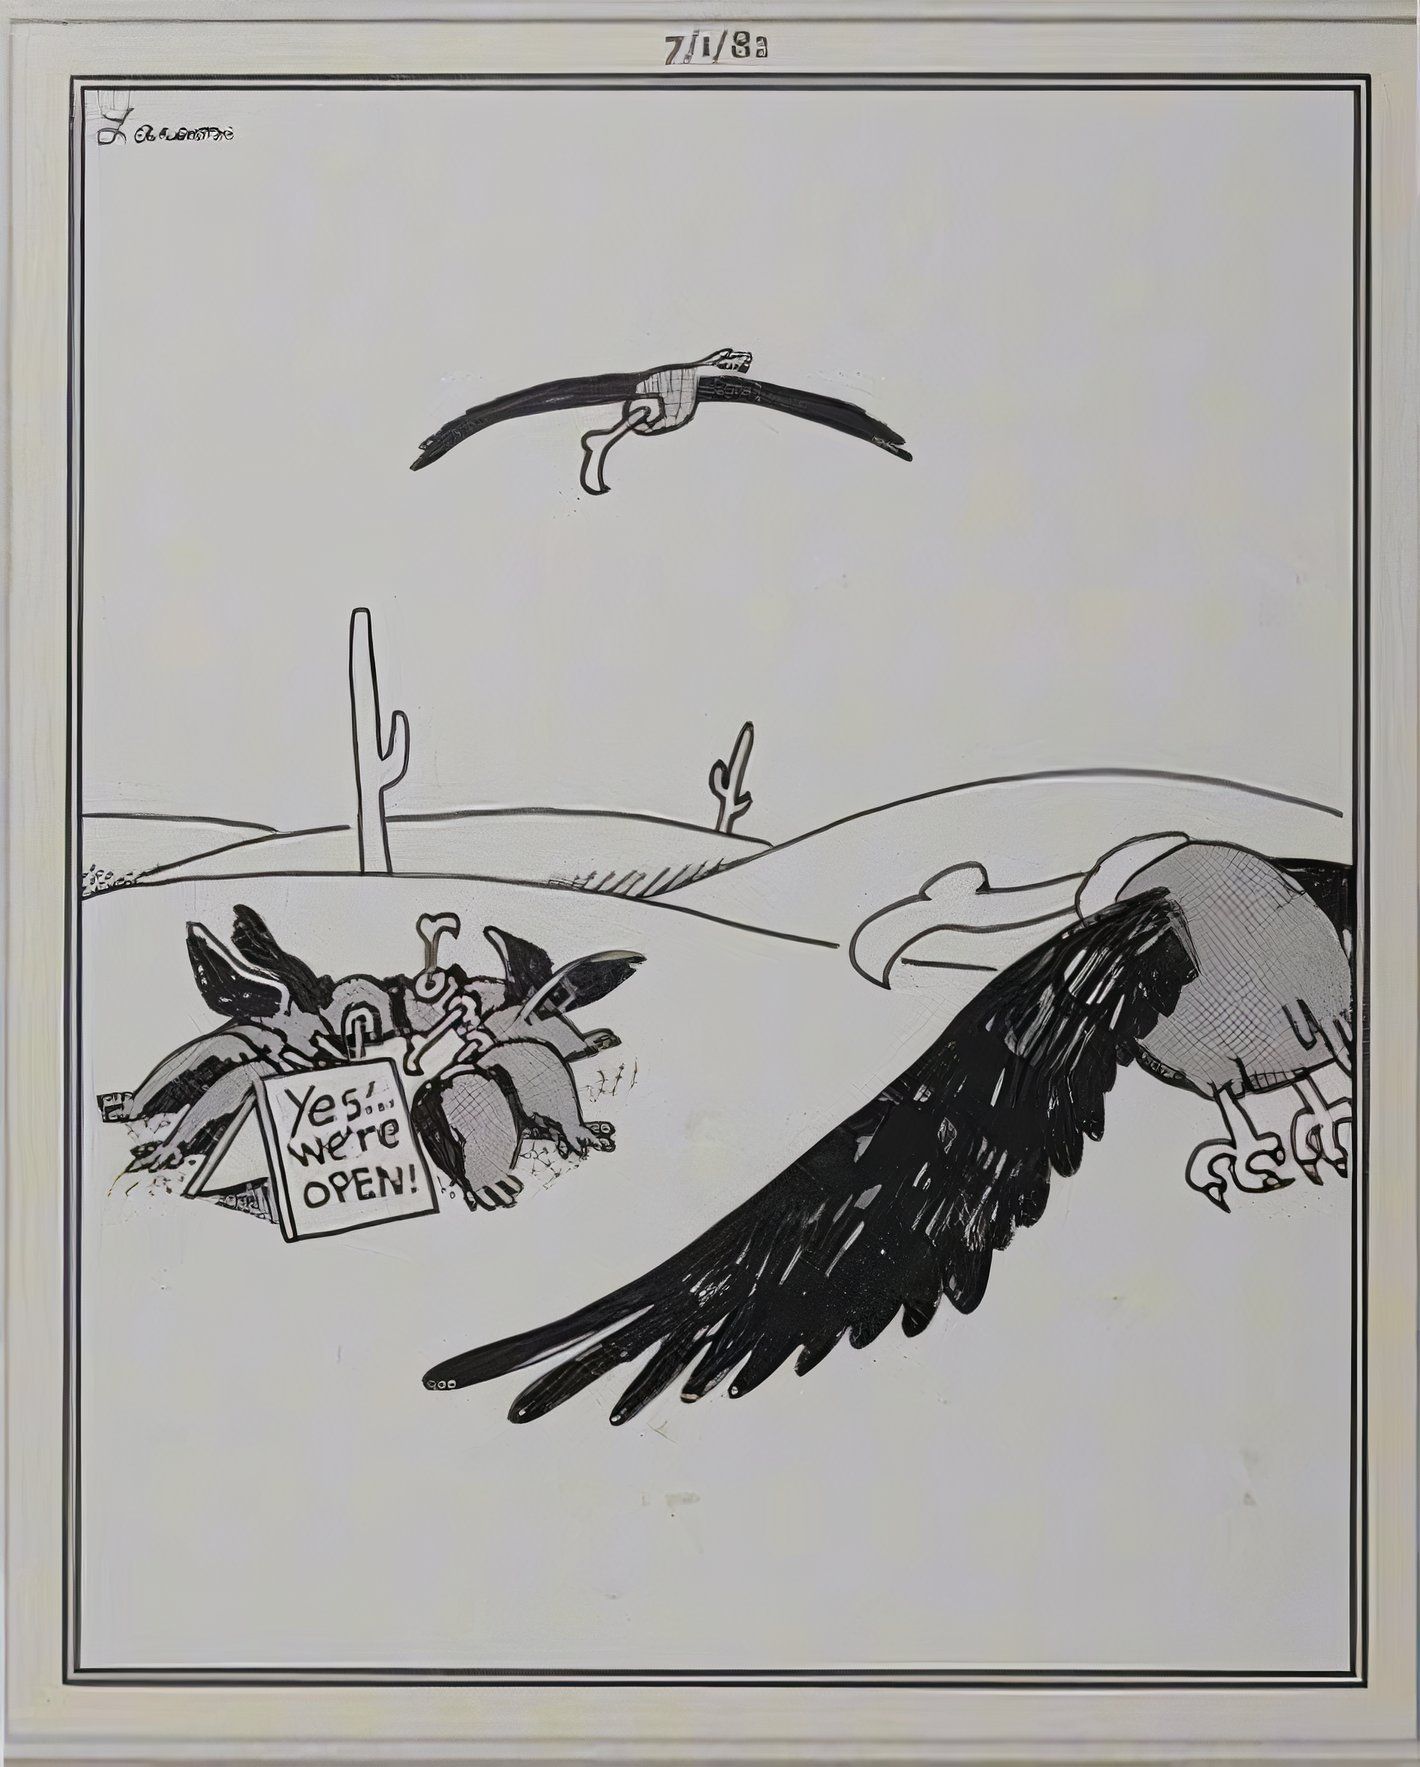 Far Side, Buzzards gathering around carrion with a sign that says 'yes we're open